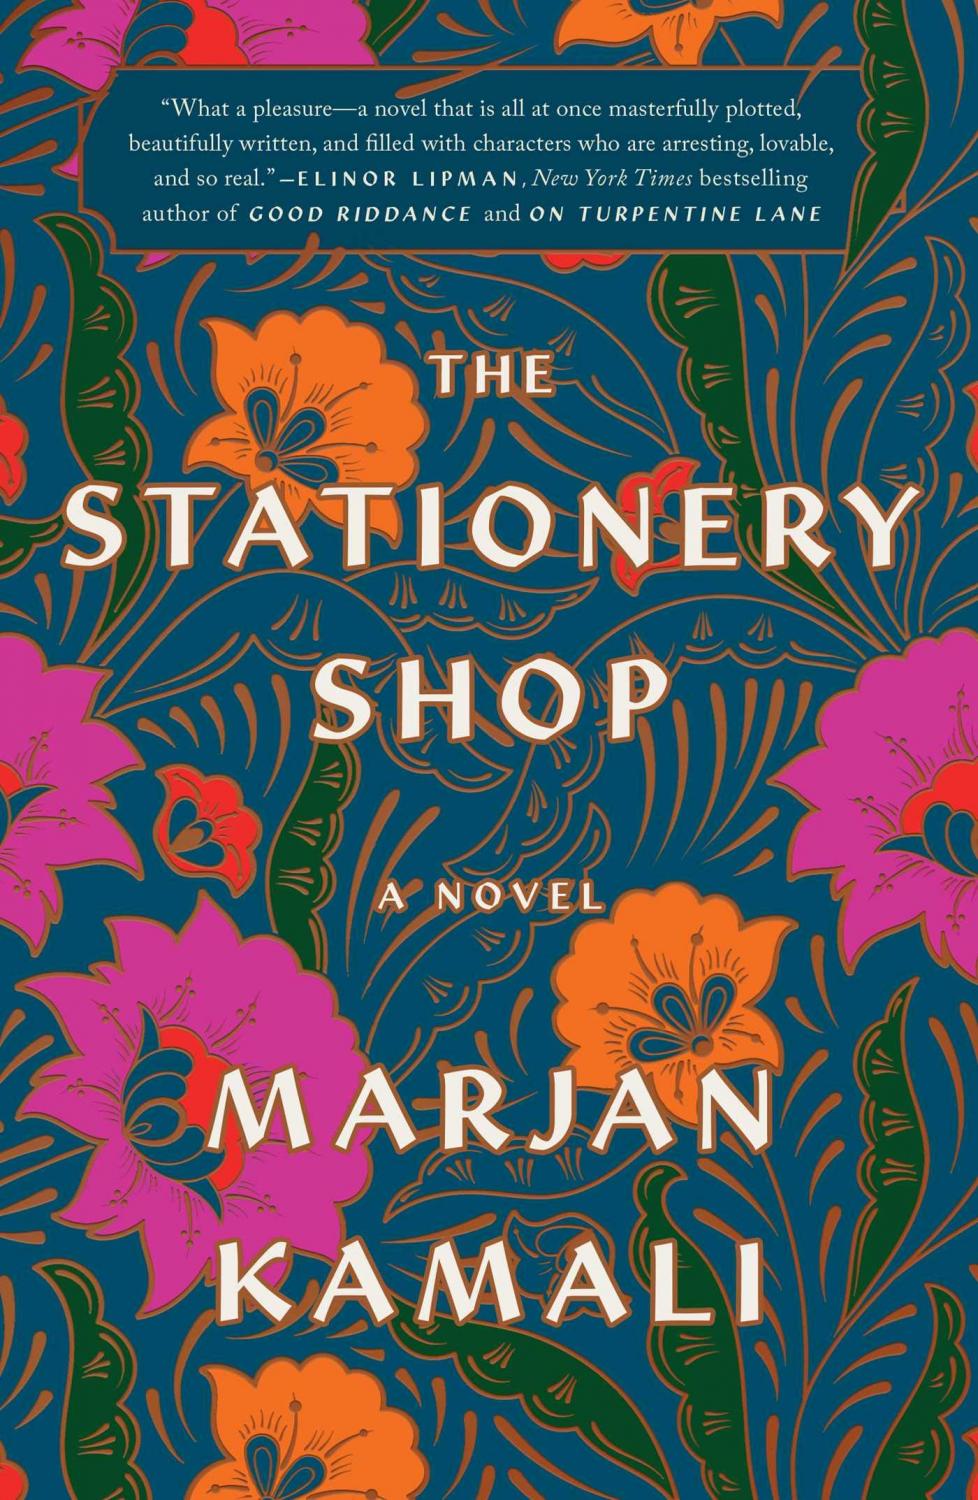 Cover of The Stationery Shop by Marjan Kamali